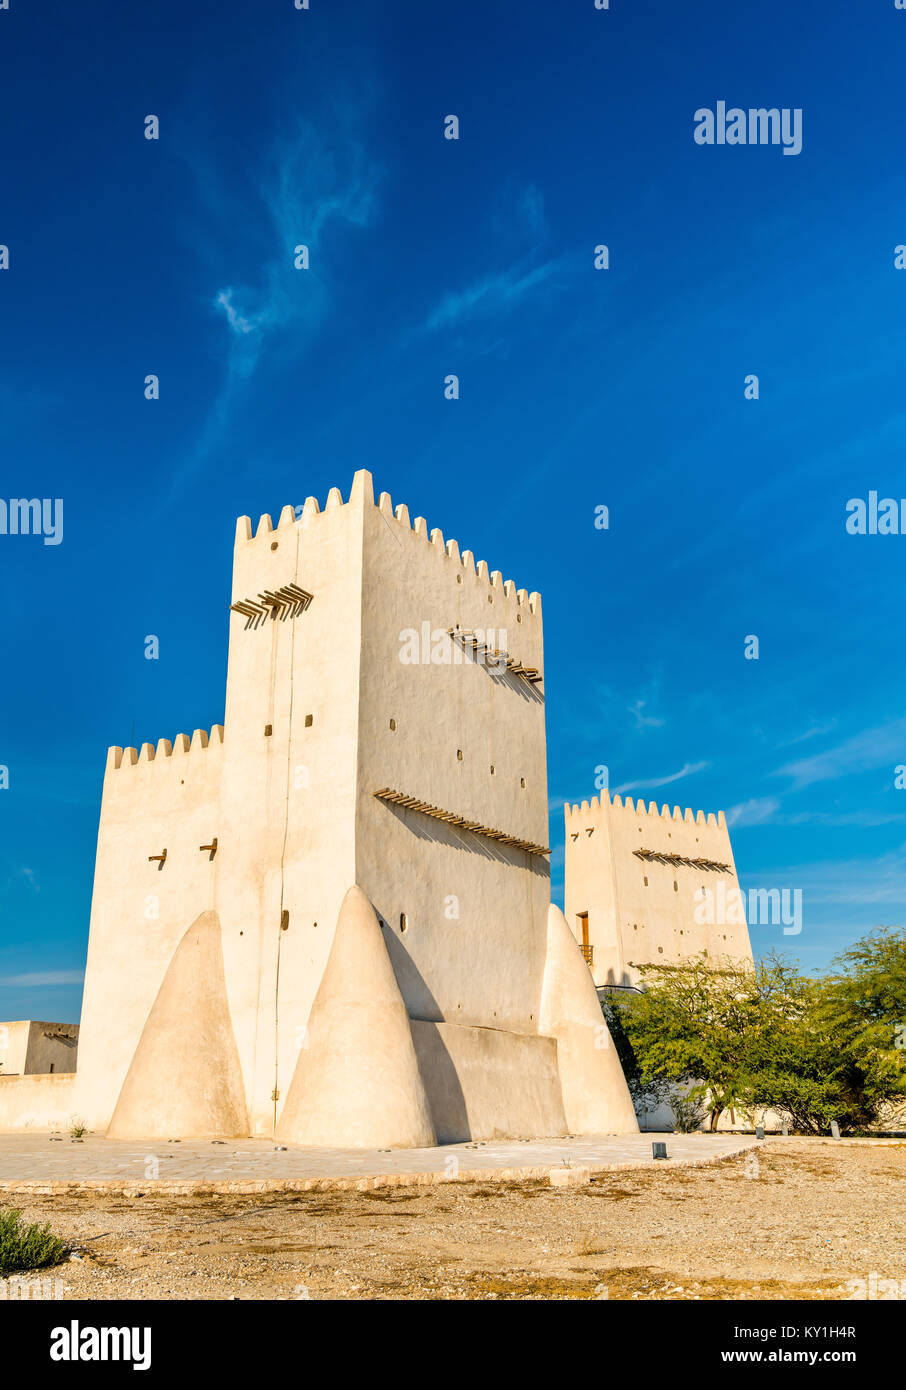 Barzan Towers, watchtowers in Umm Salal Mohammed near Doha - Qatar, the Middle East Stock Photo